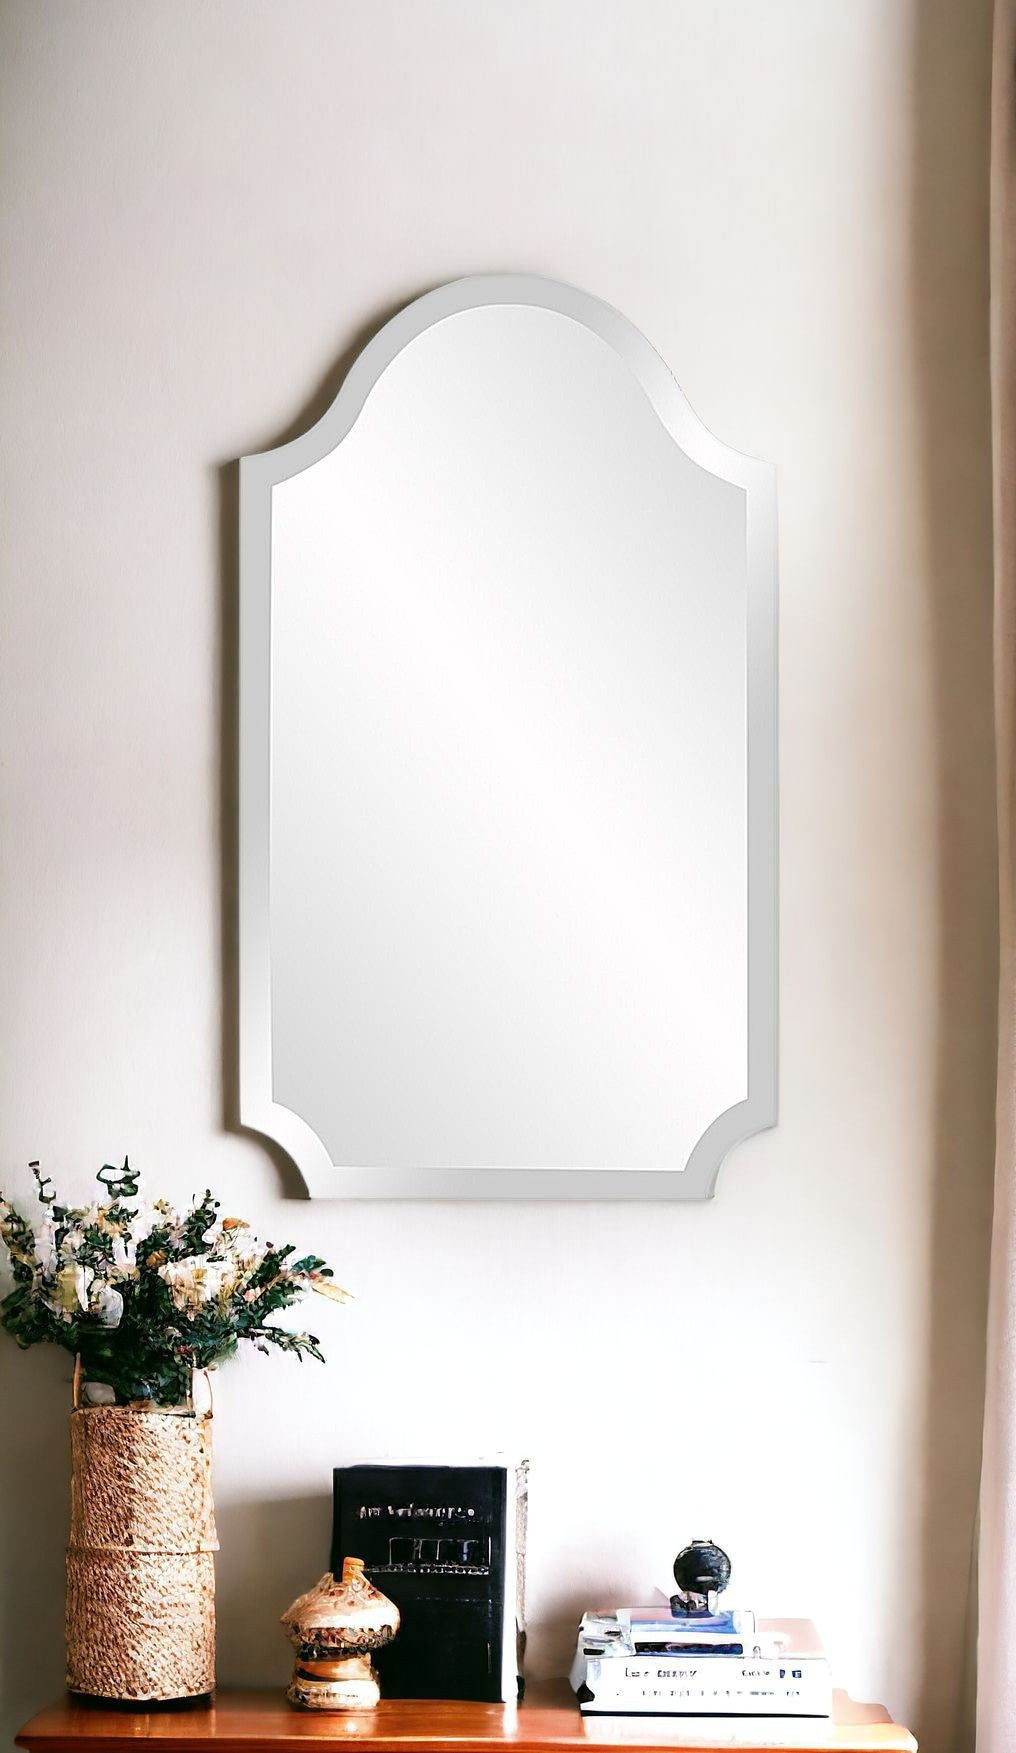 27" Rectangle Wall Mounted Accent Mirror With Glass Frame